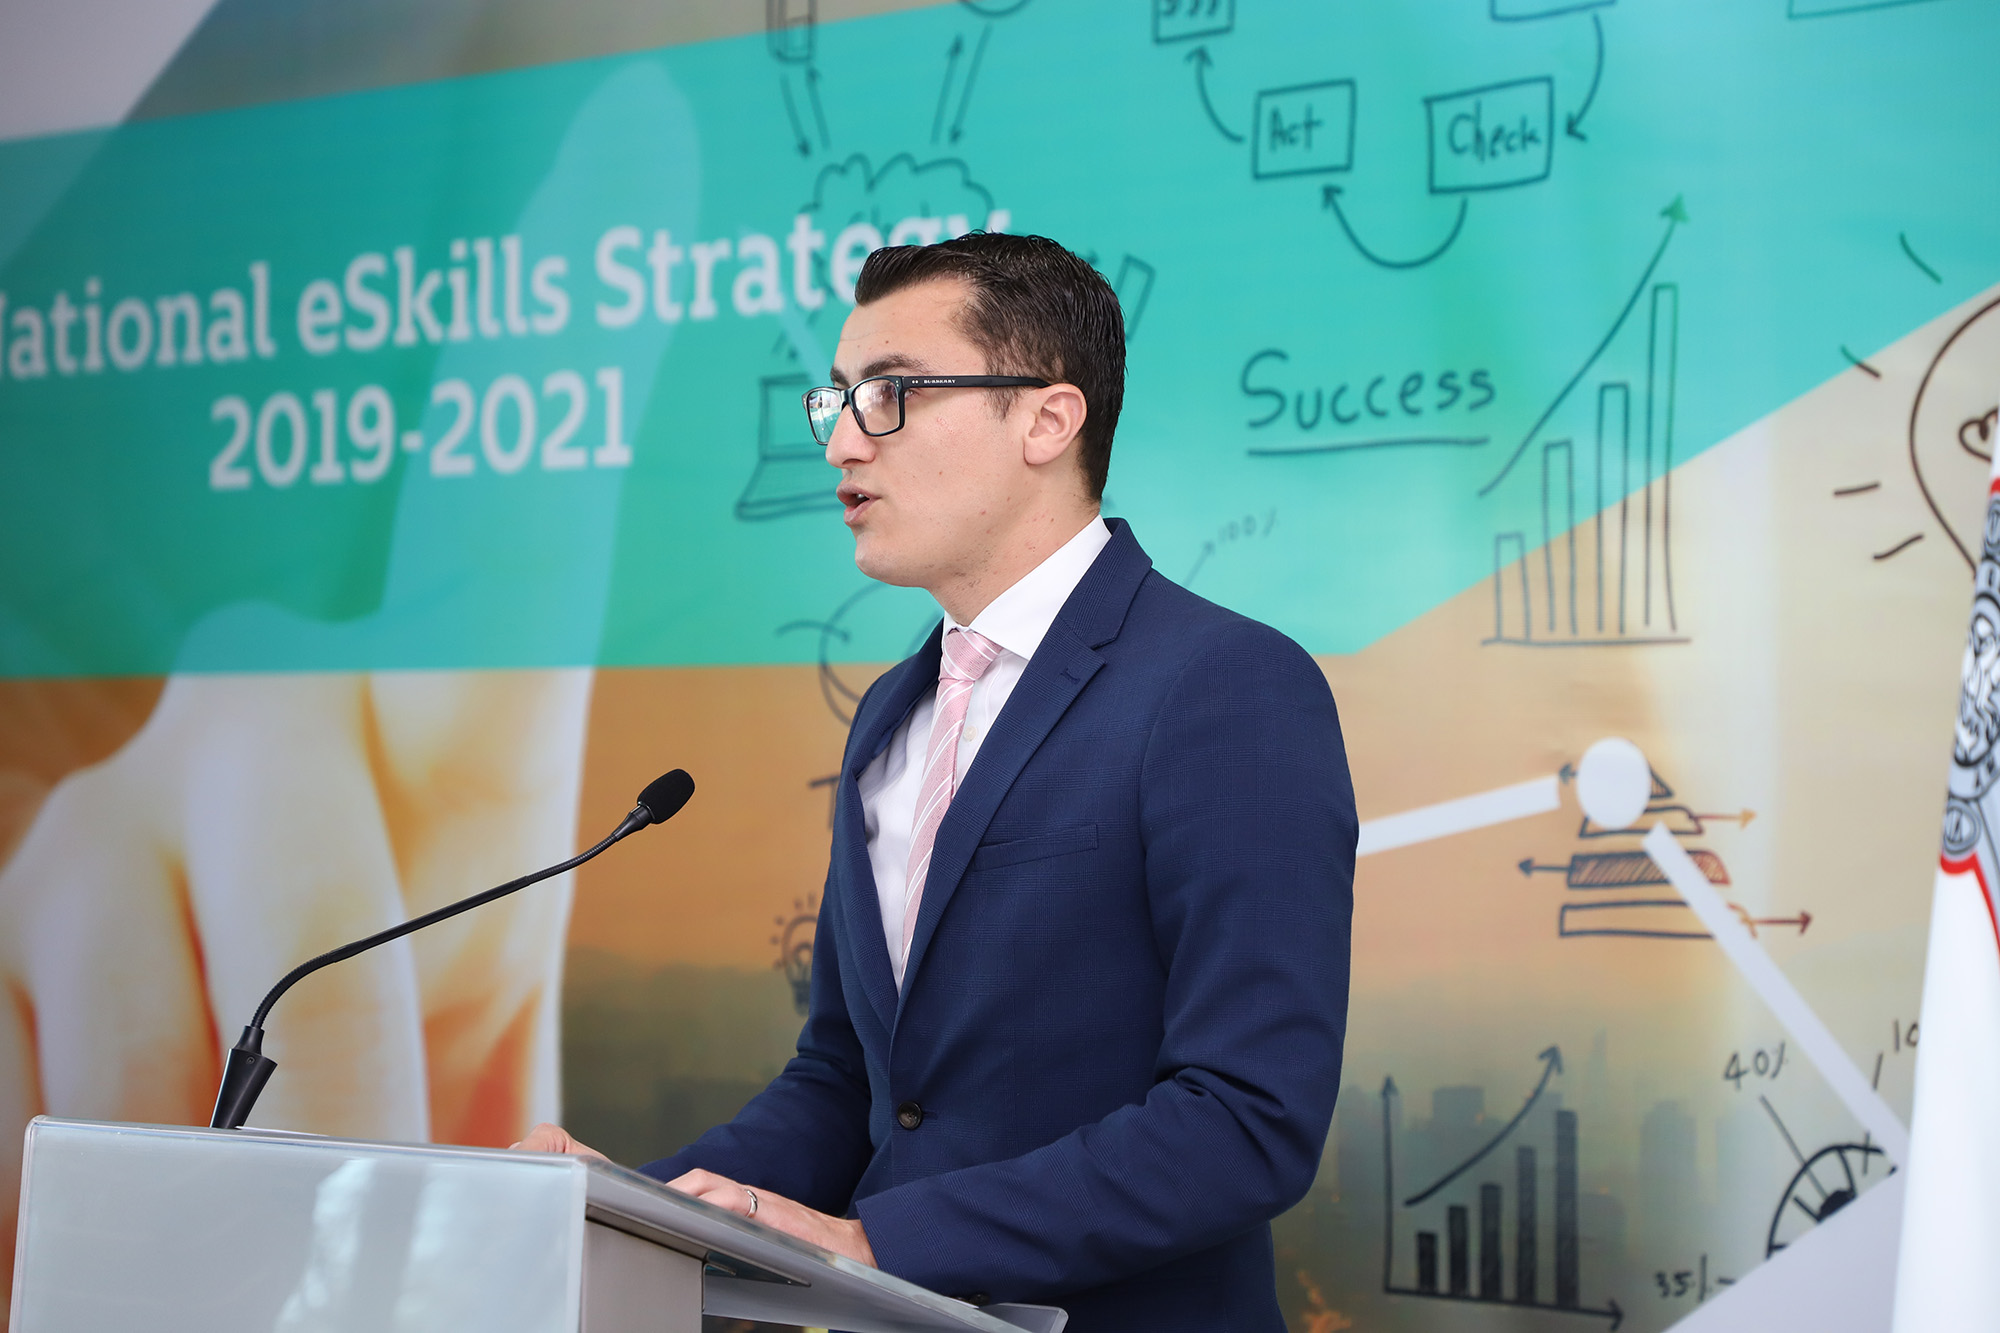 Launch of National eSkills Strategy 2019-2021